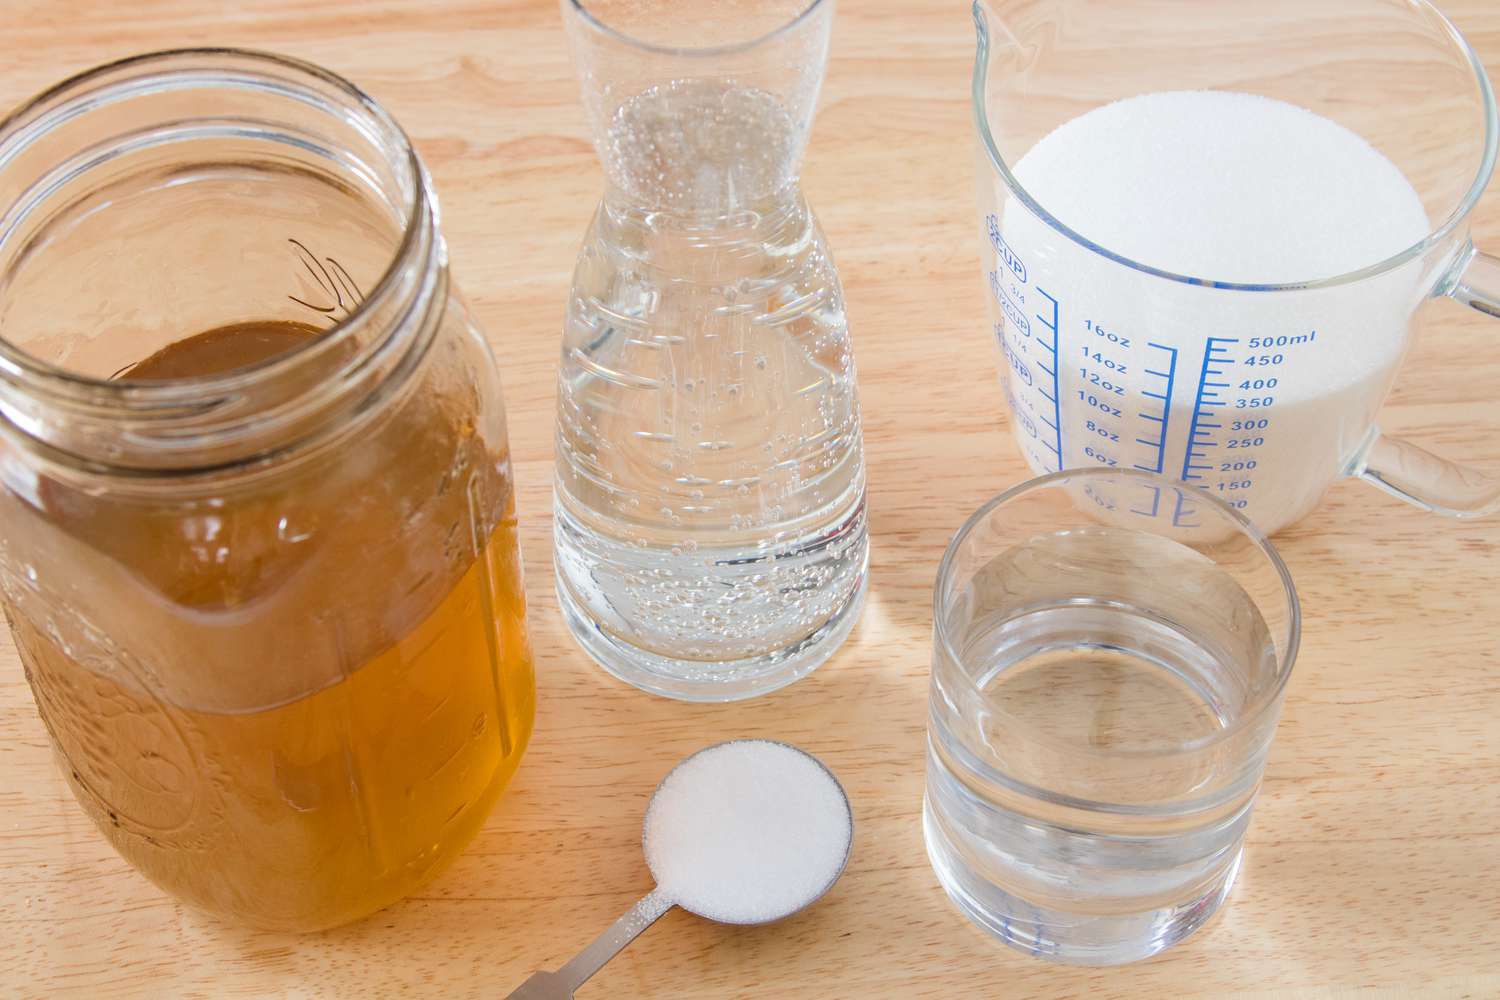 Ingredients for Homemade Quinine-Free Tonic Syrup